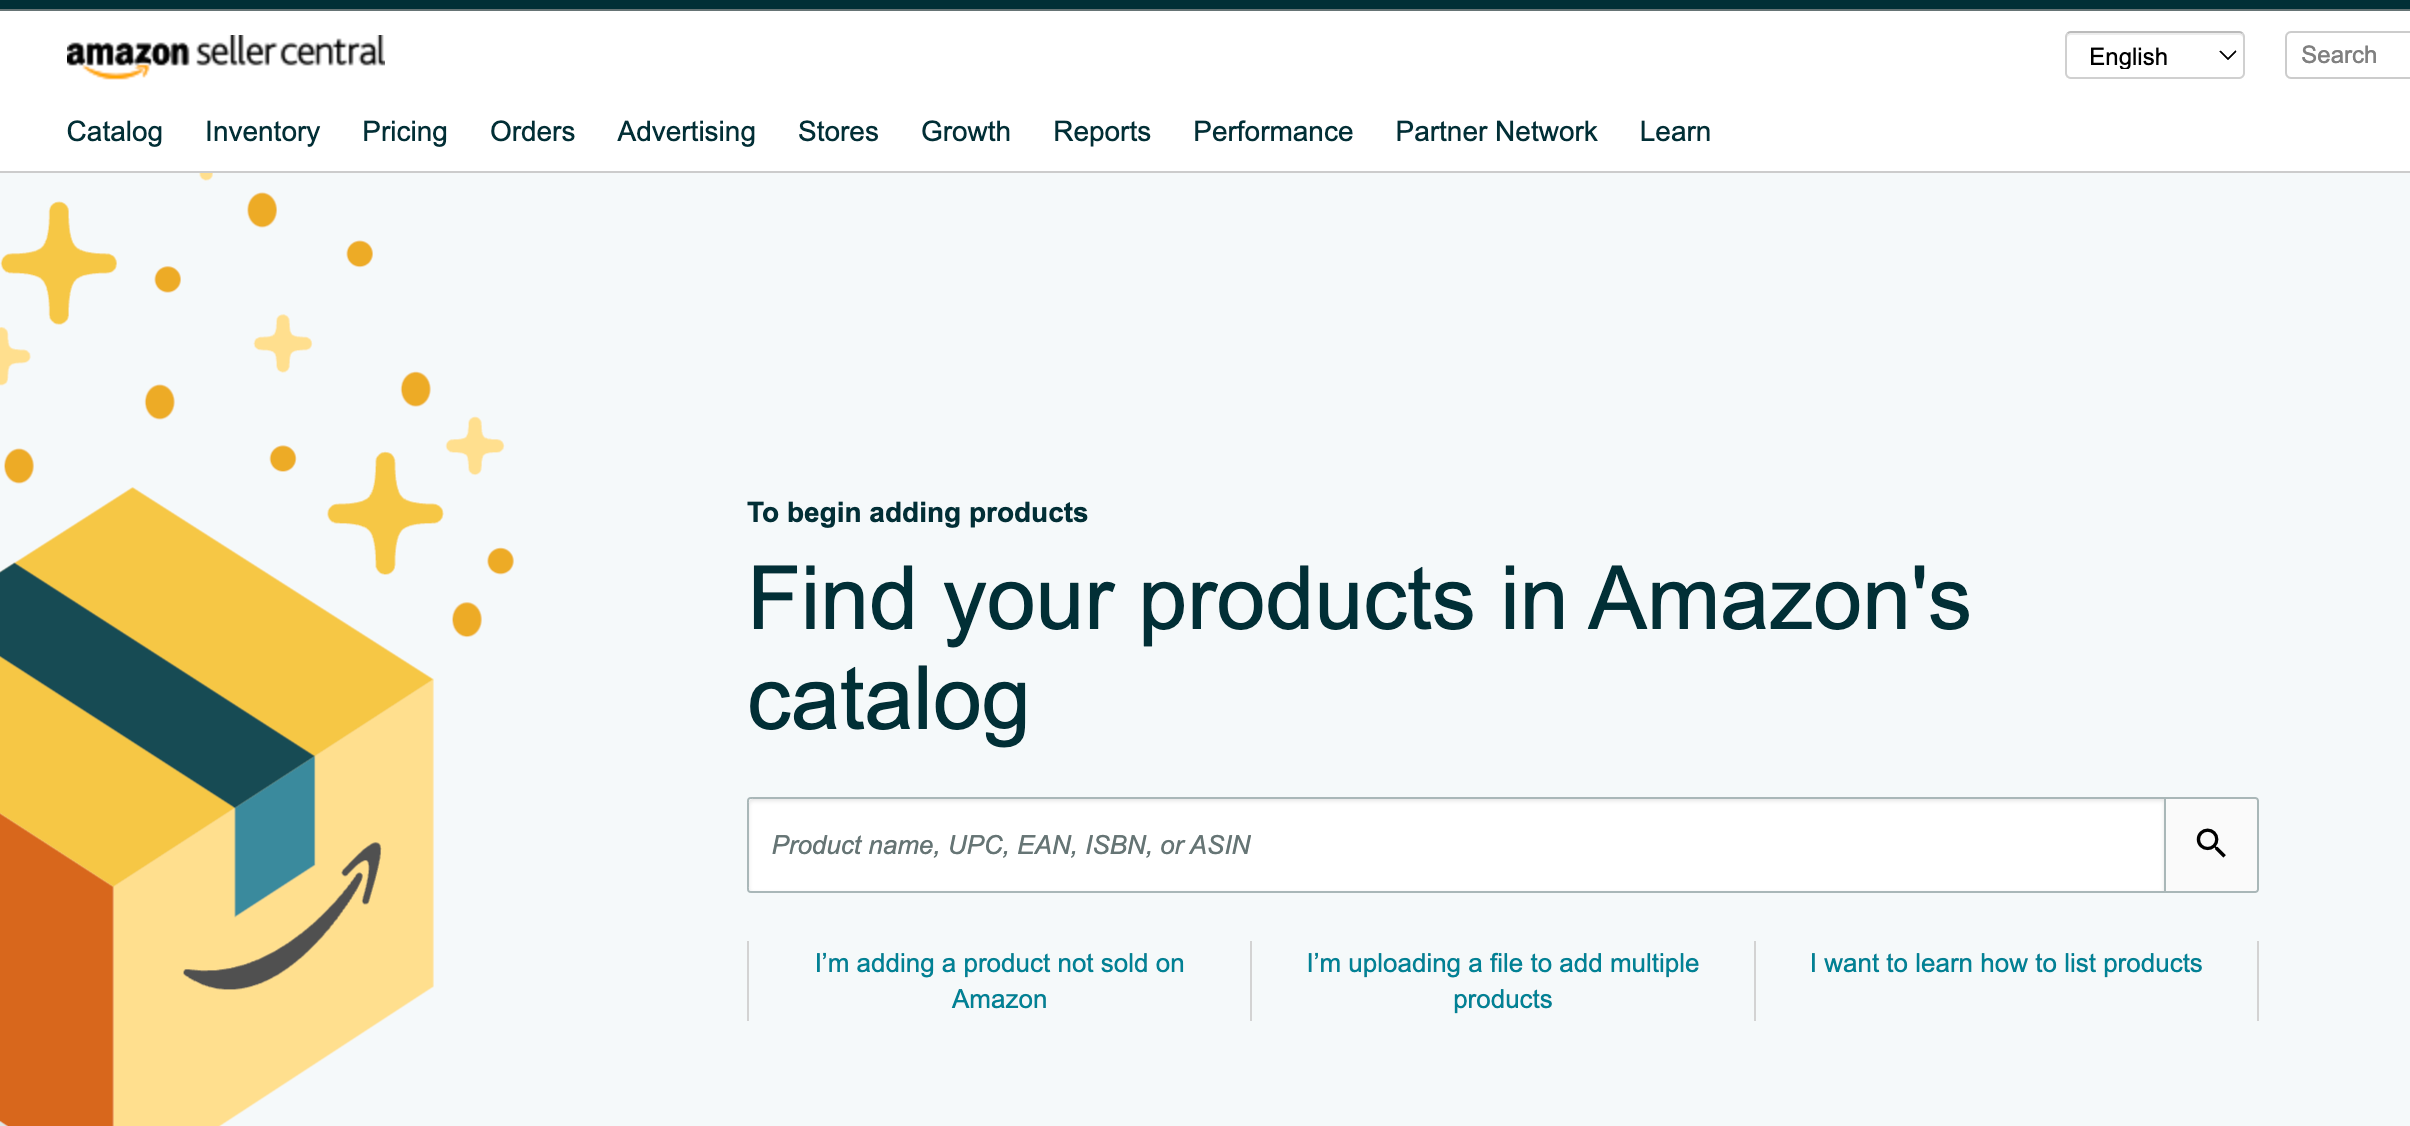 Search for an existing product, or add a new one.